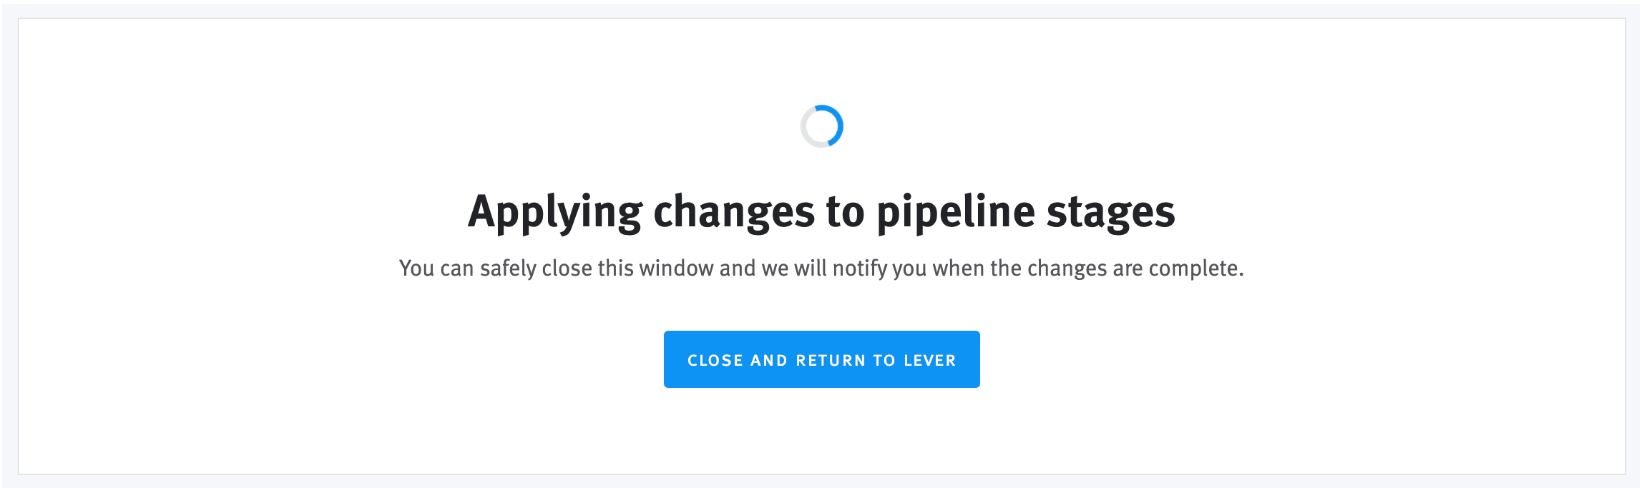 Lever applying changes to pipeline stages notification message.